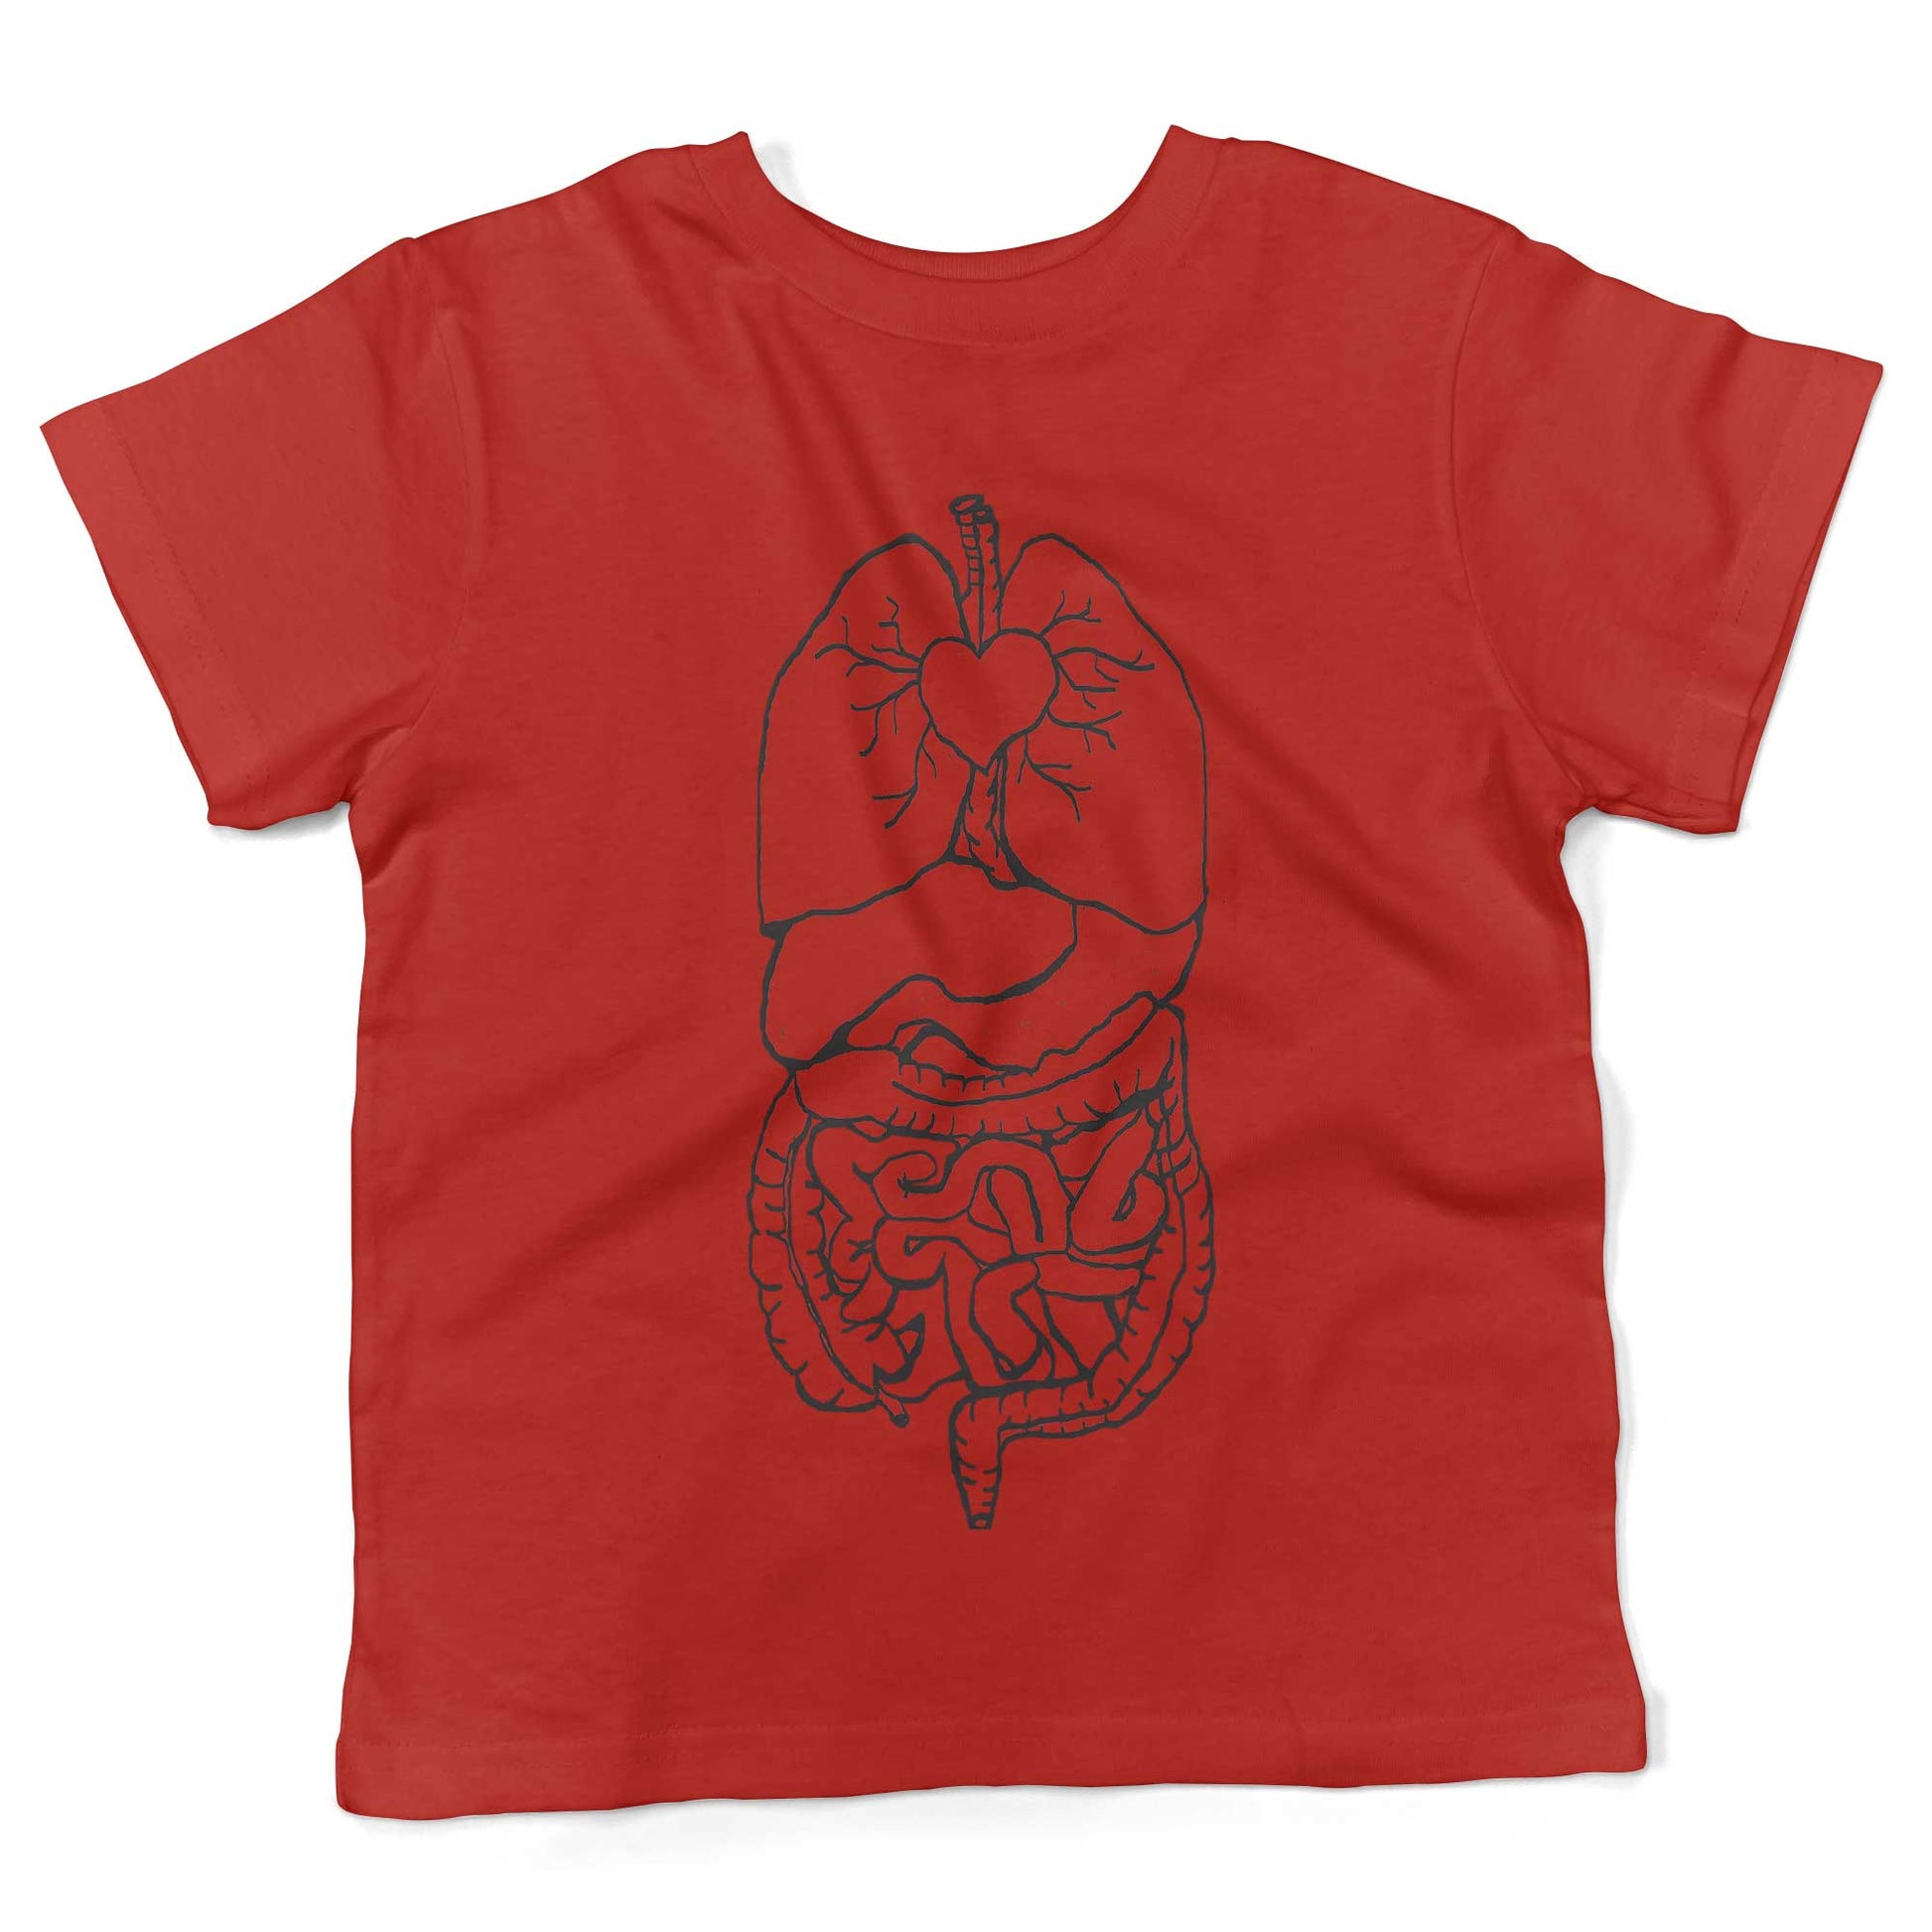 Digestive System Toddler Shirt-Red-2T